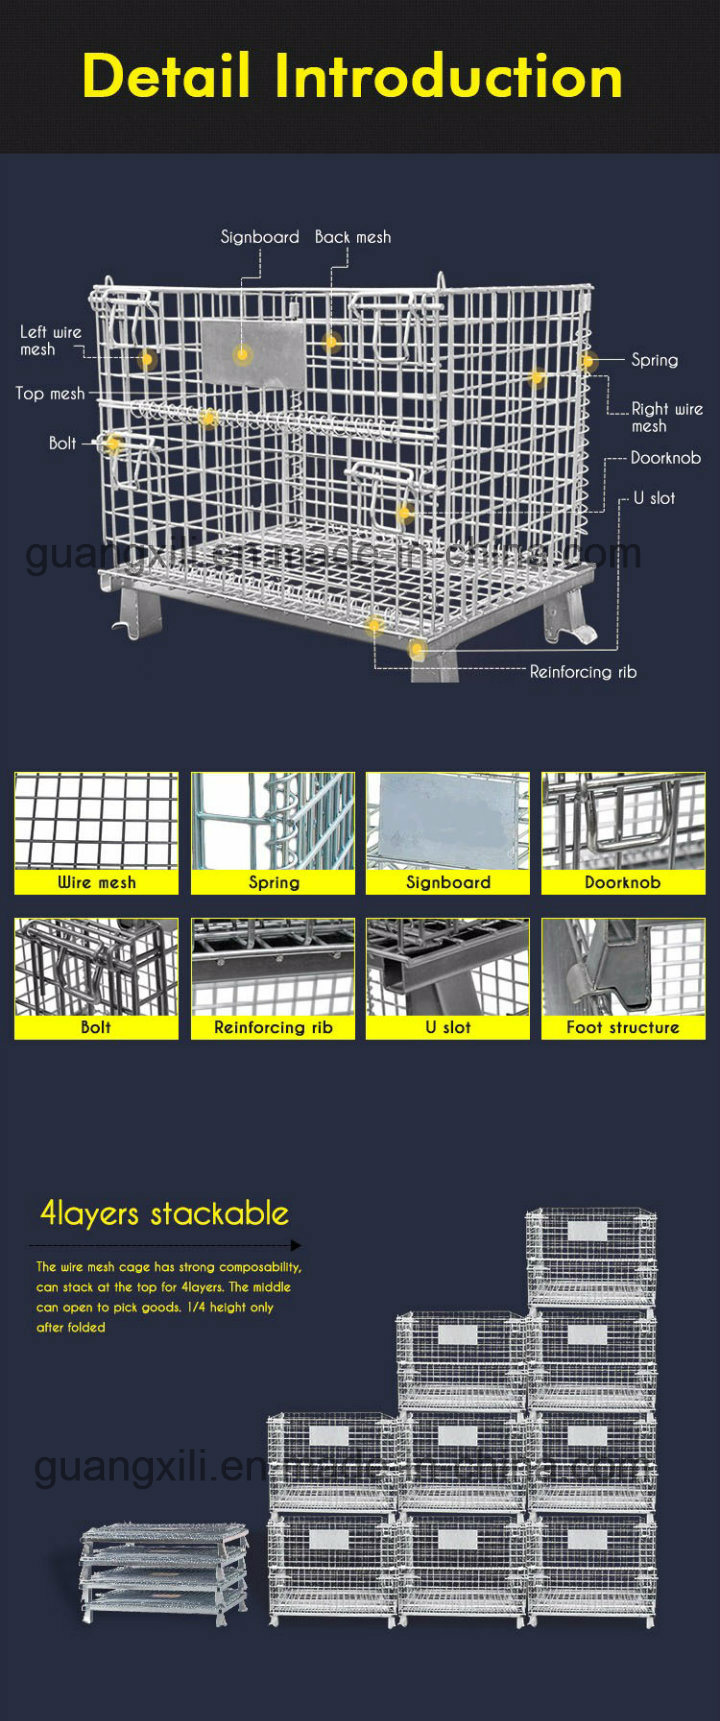 Exported Equipment Transfer Cargo Storage Wire Mesh Cage